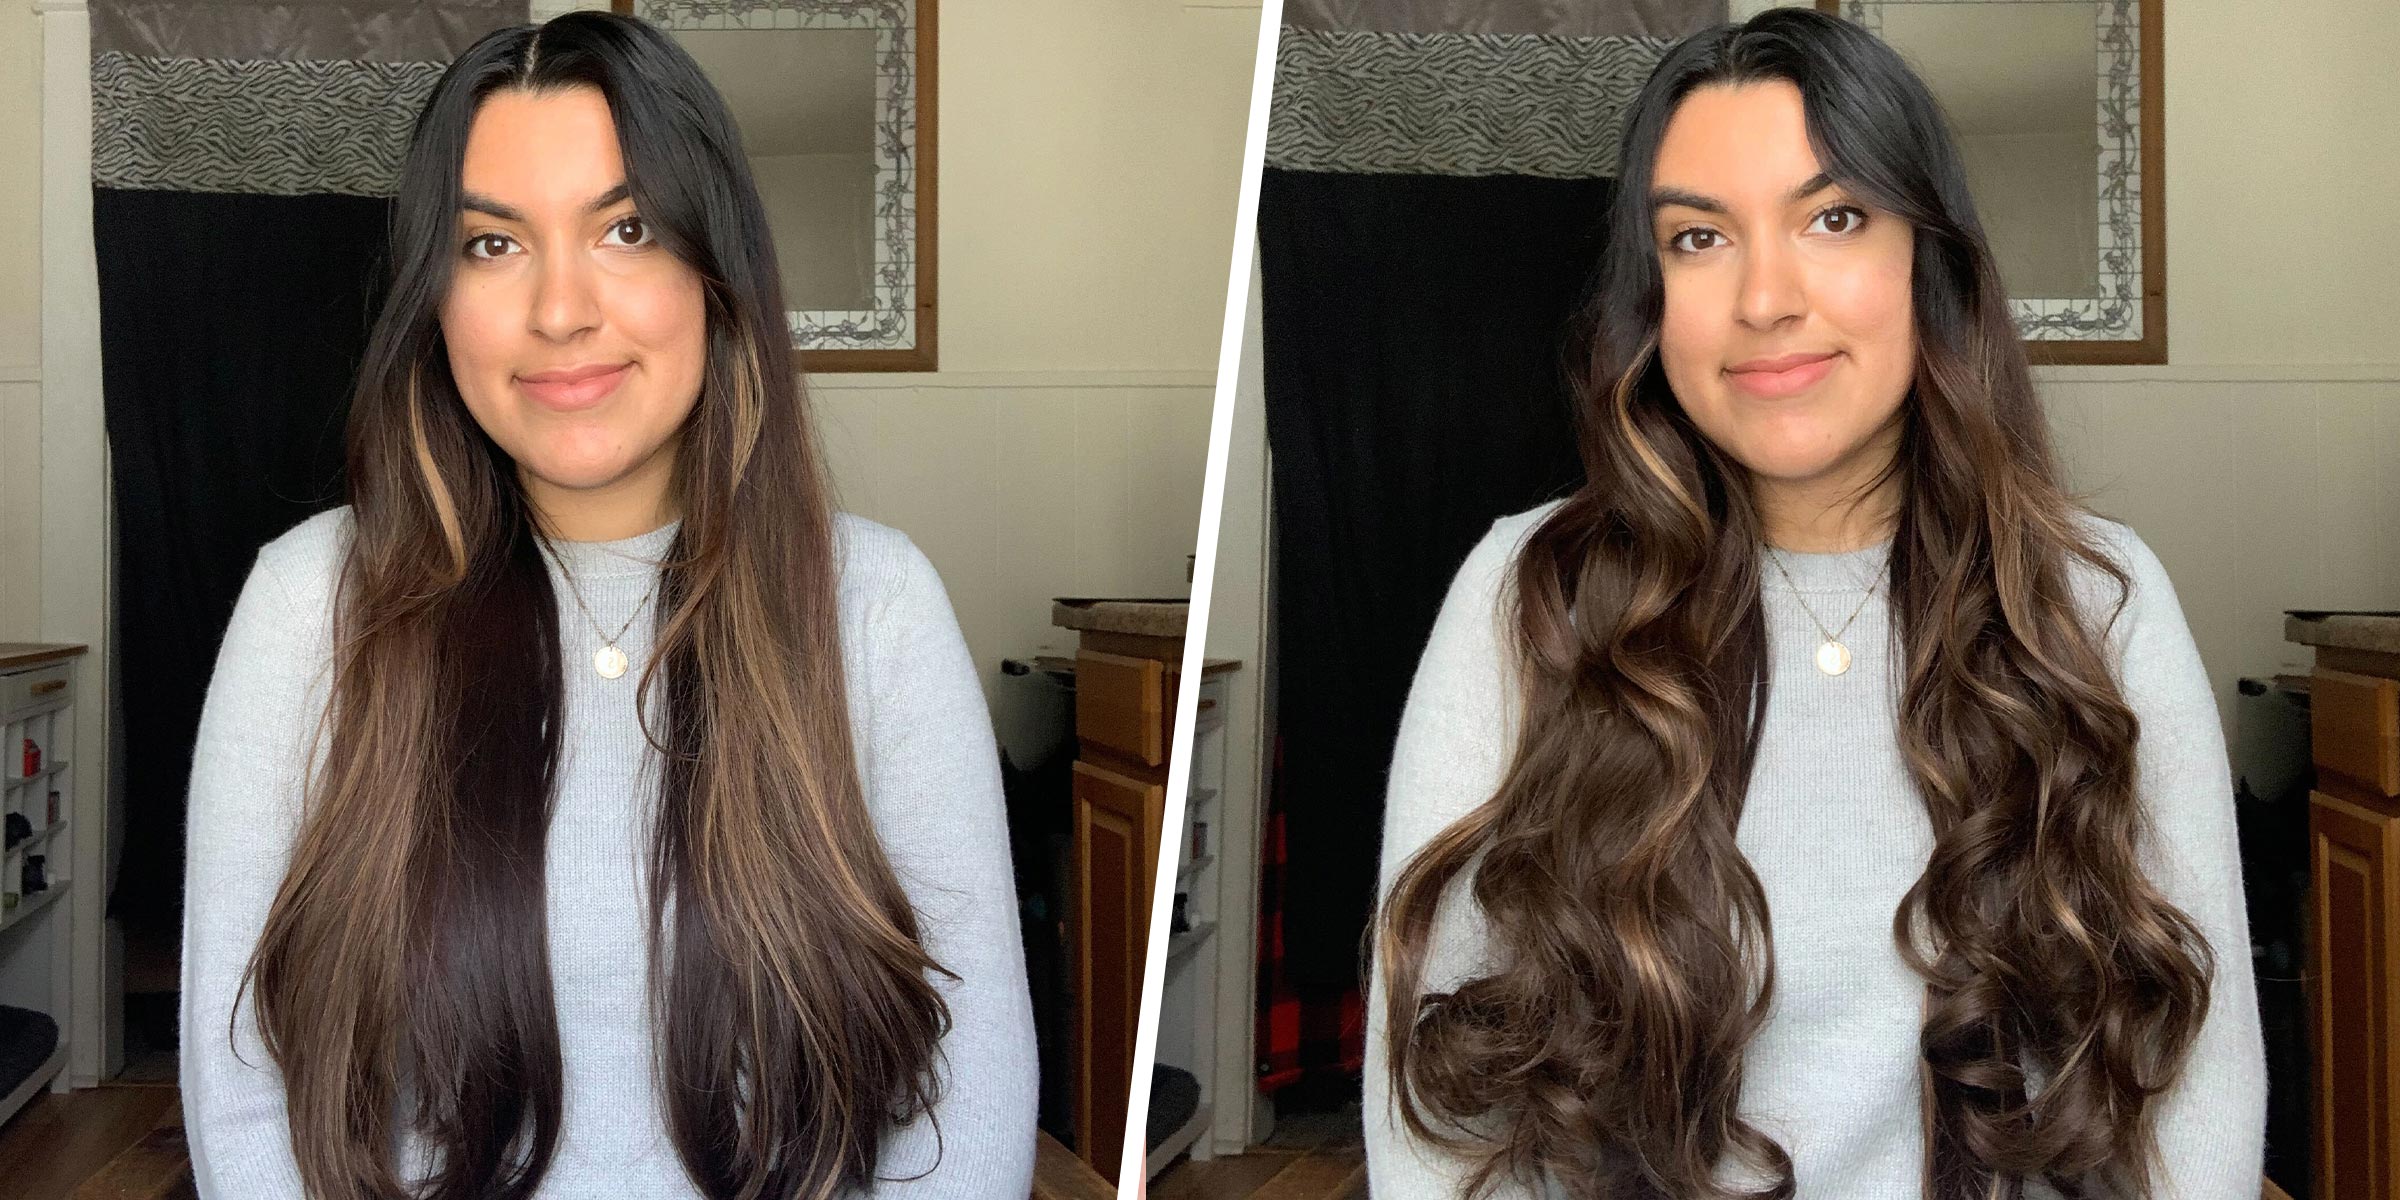 Turn up hair lengths with hair extensions